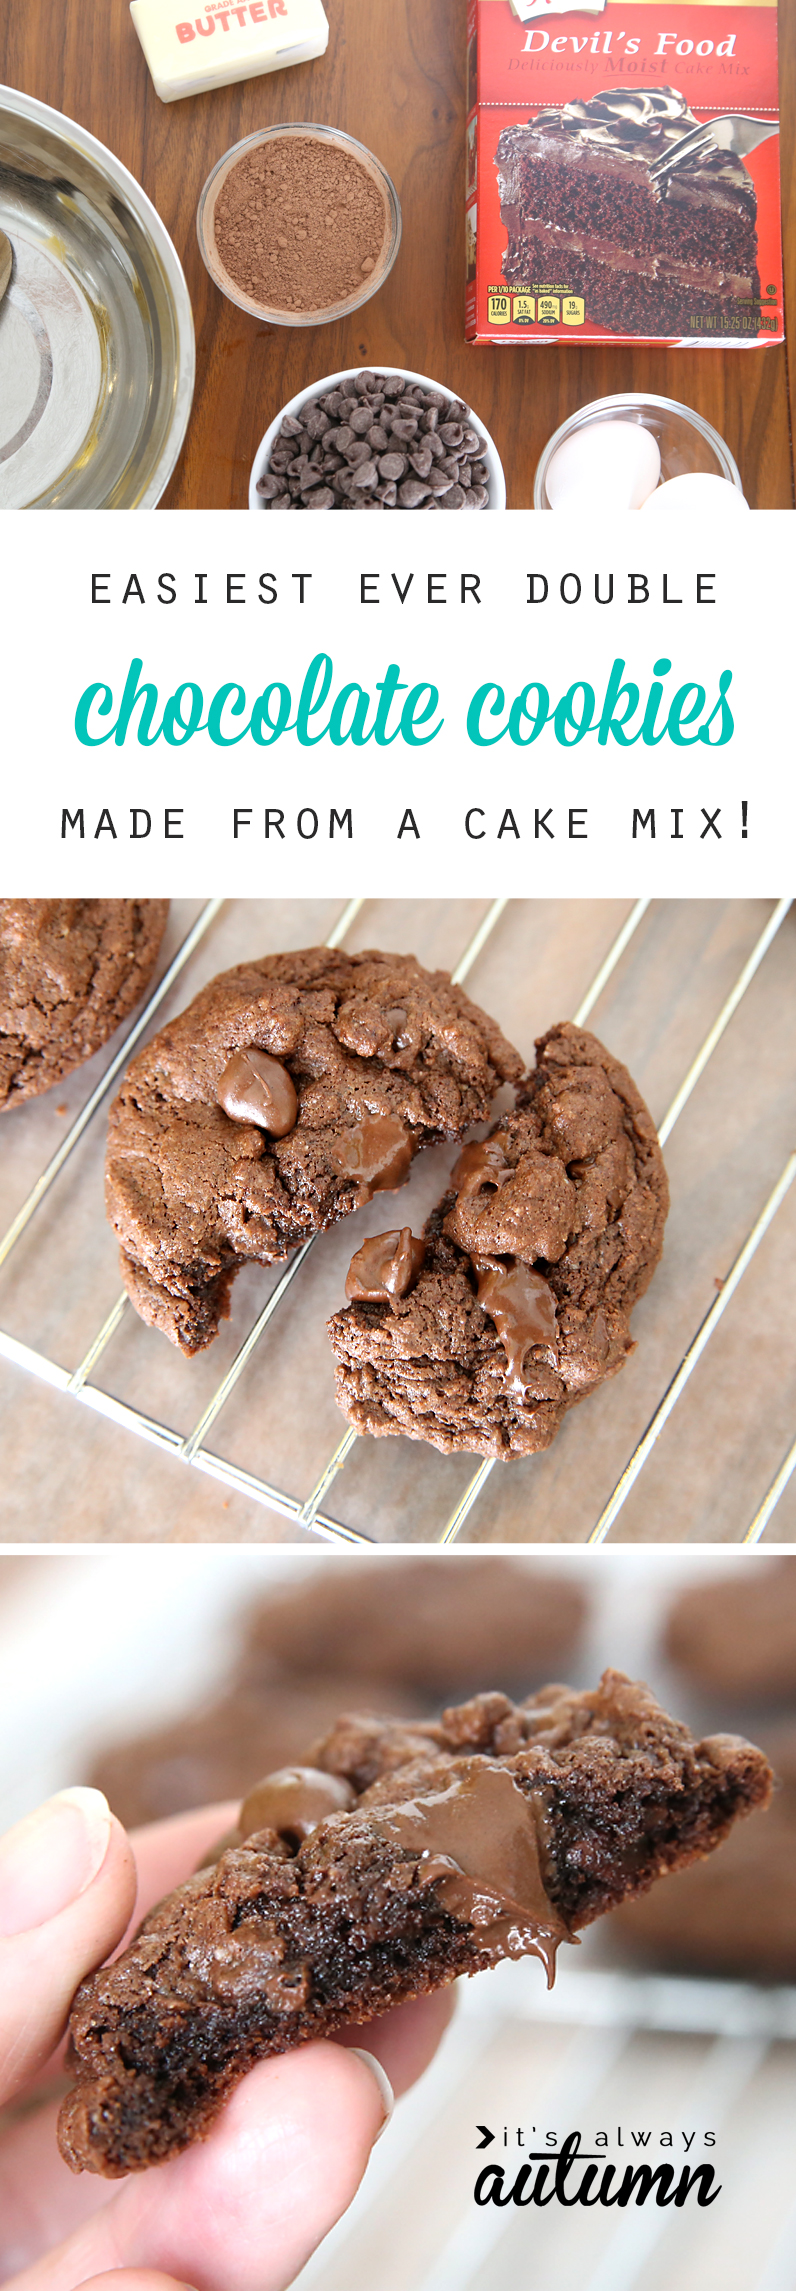 double chocolate cookies made from a cake mix